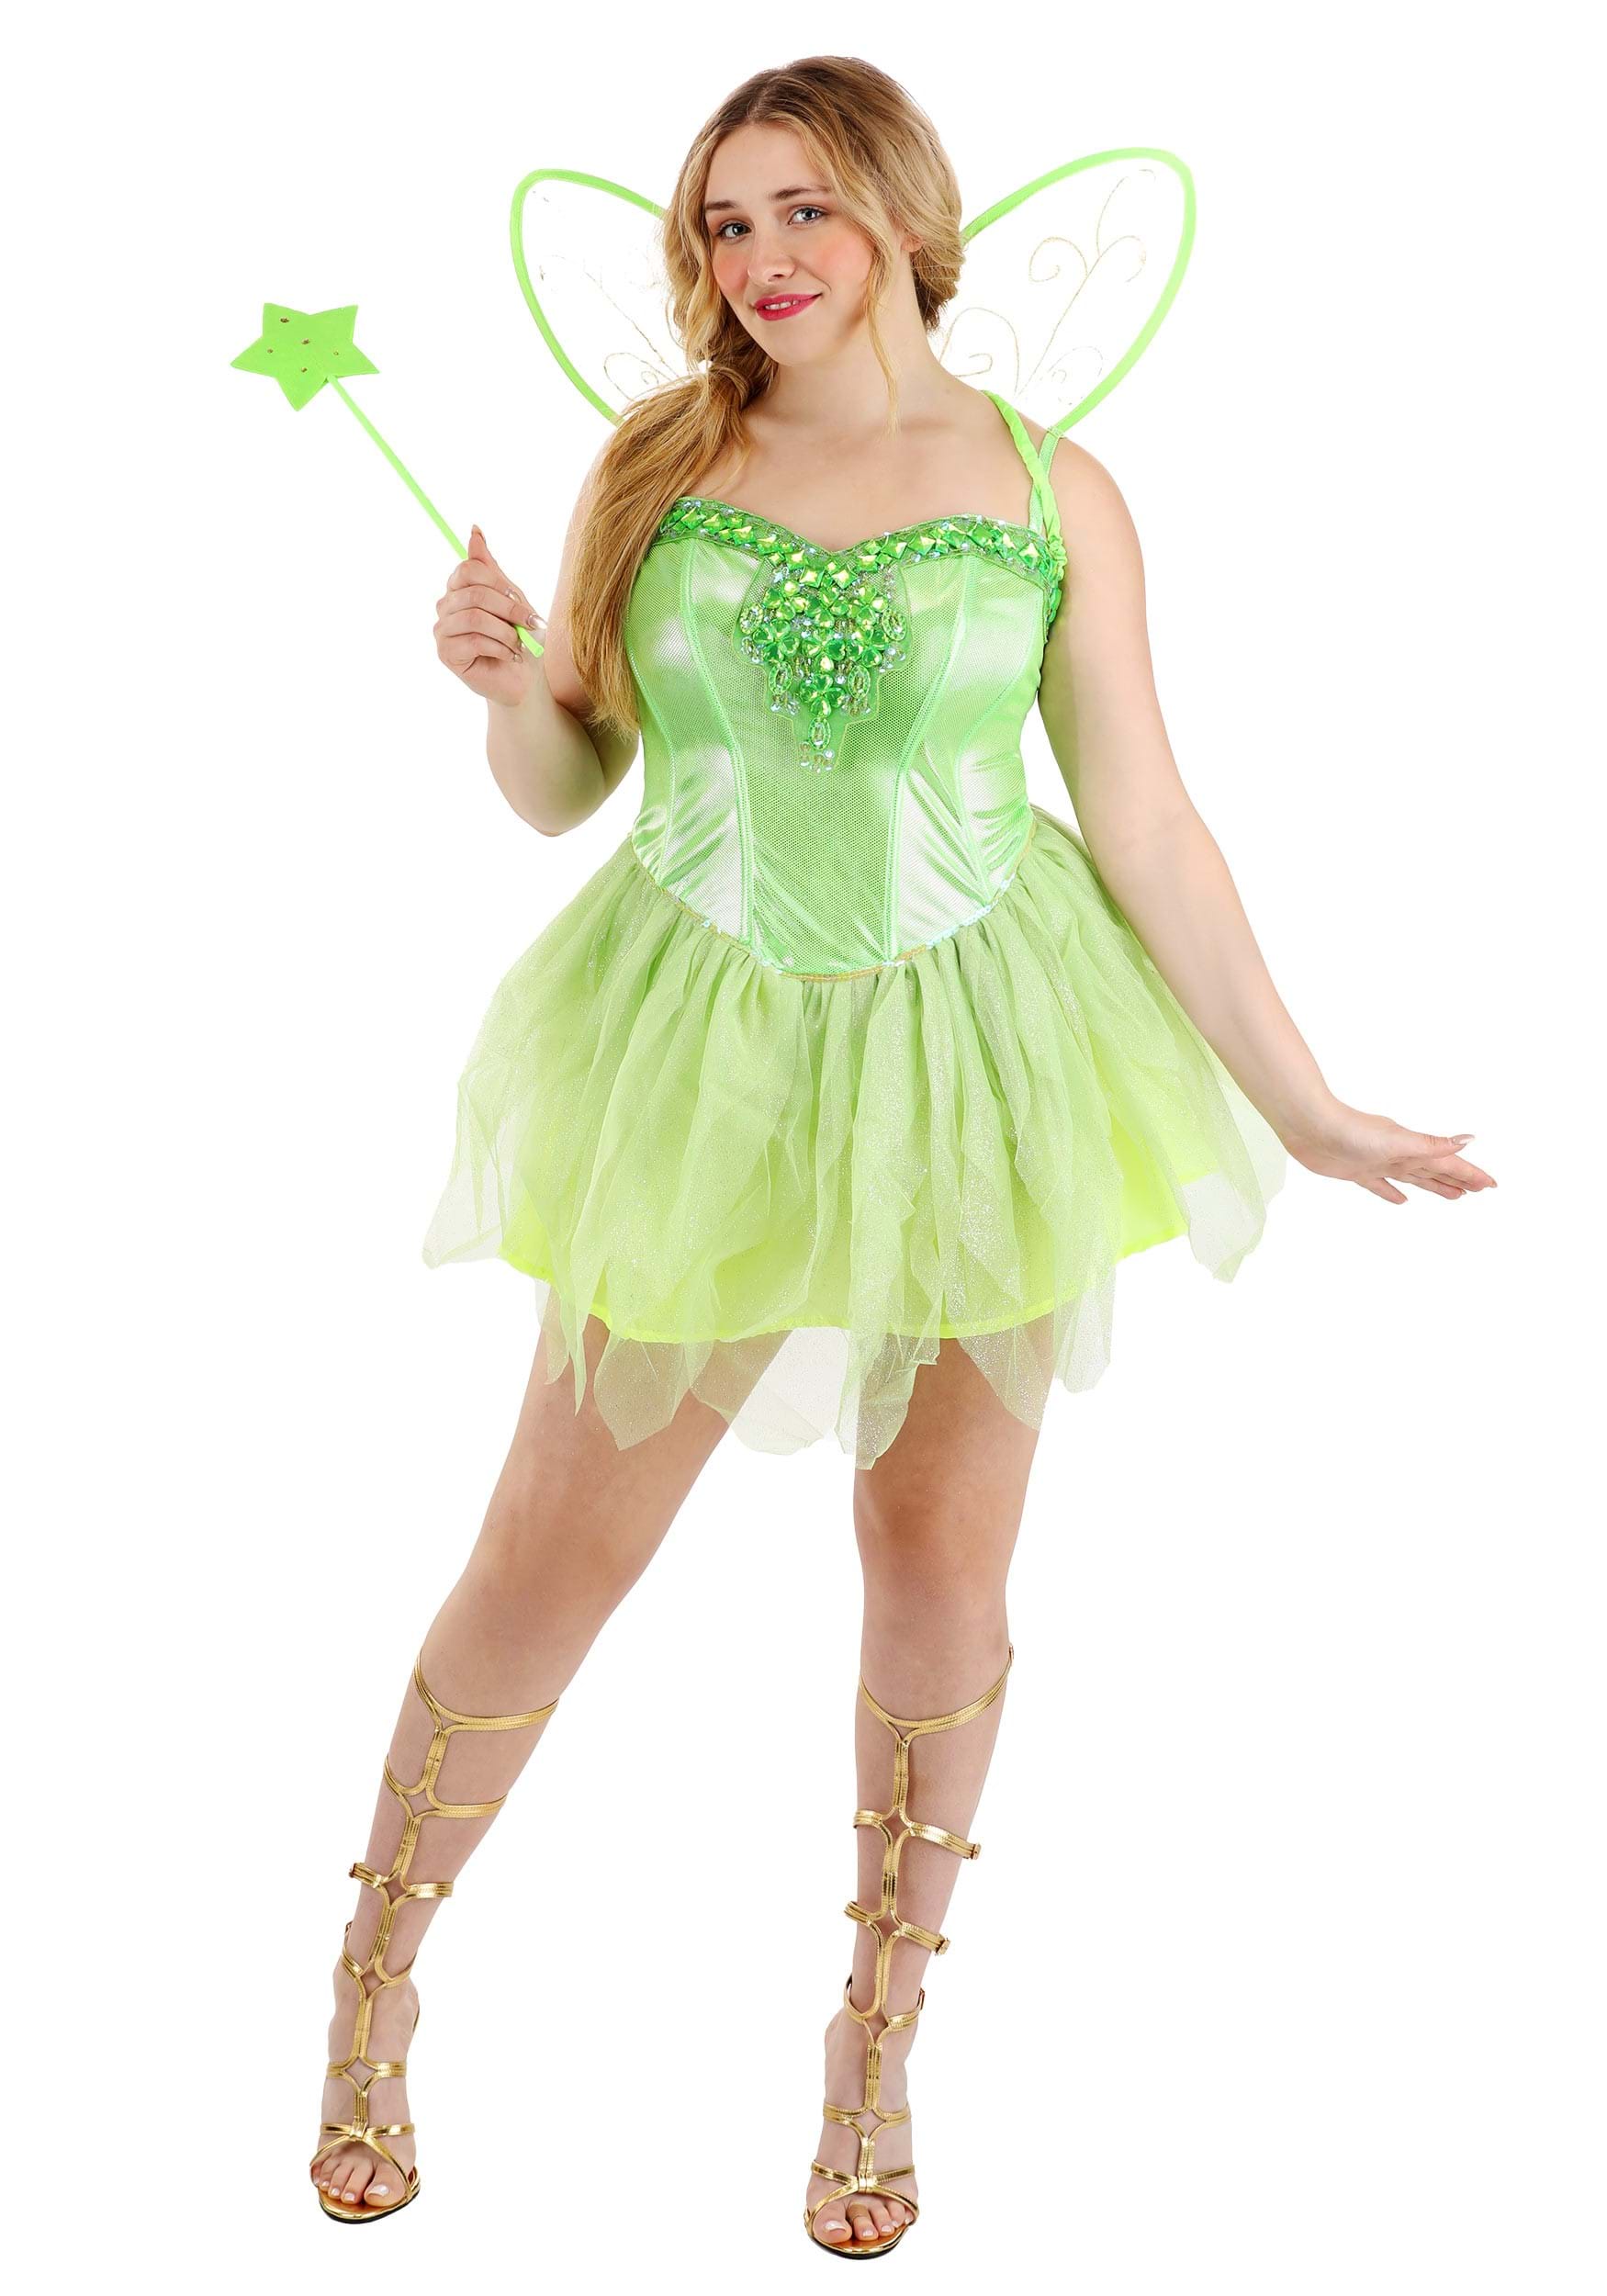 Fairy-Licious Costume For Women